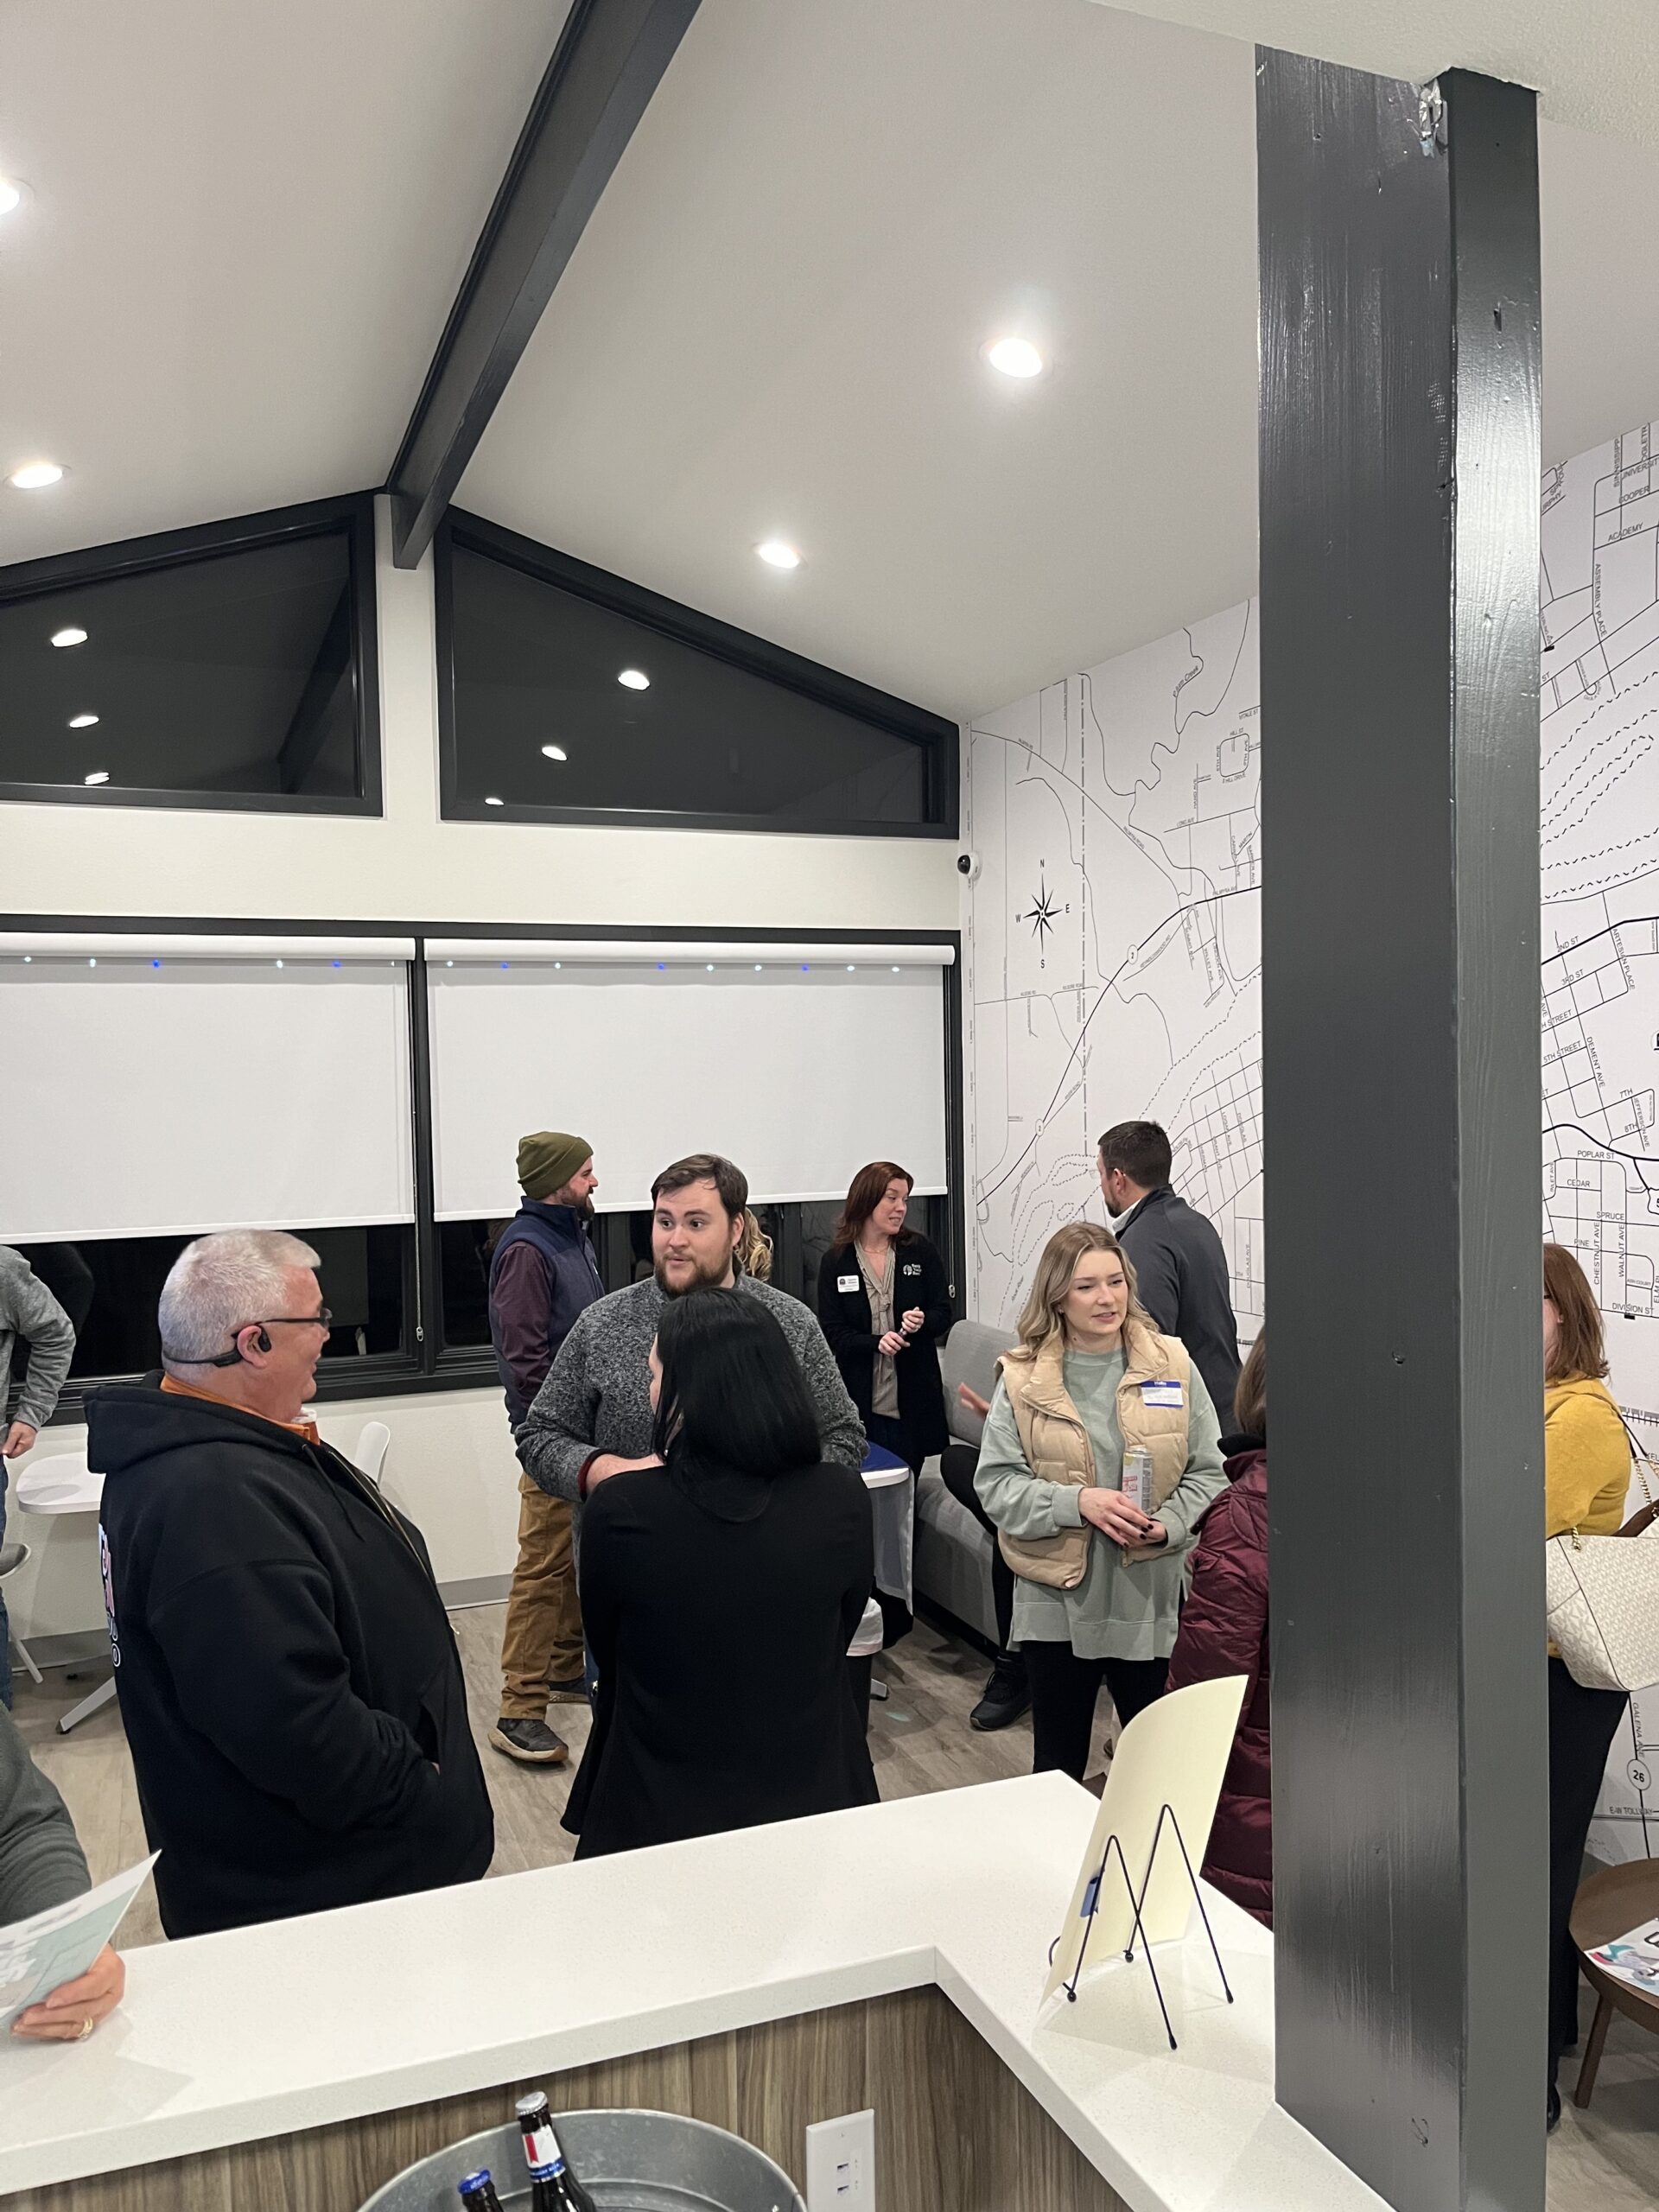 Above: Members of the Dixon Chamber of Commerce converse and connect at the first Business After Business Event of the Year.